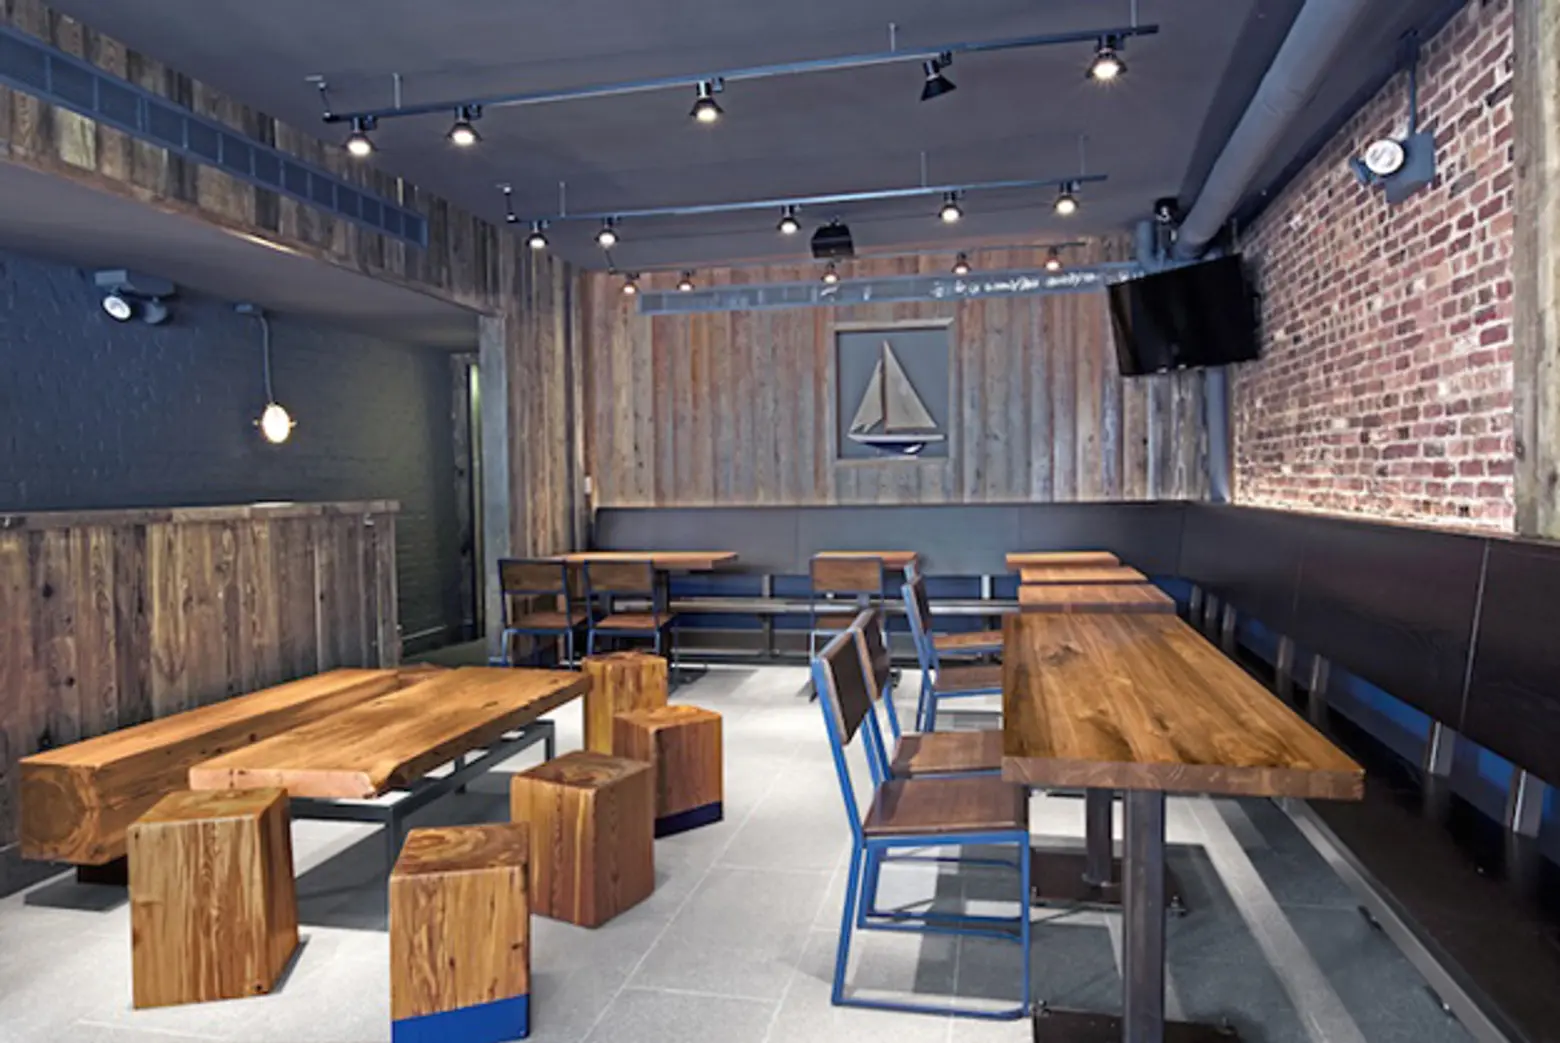 Your Daily Link Fix: Shake Shack’s Well-Crafted Furniture; Amazing Modern Kitchen Cabinets